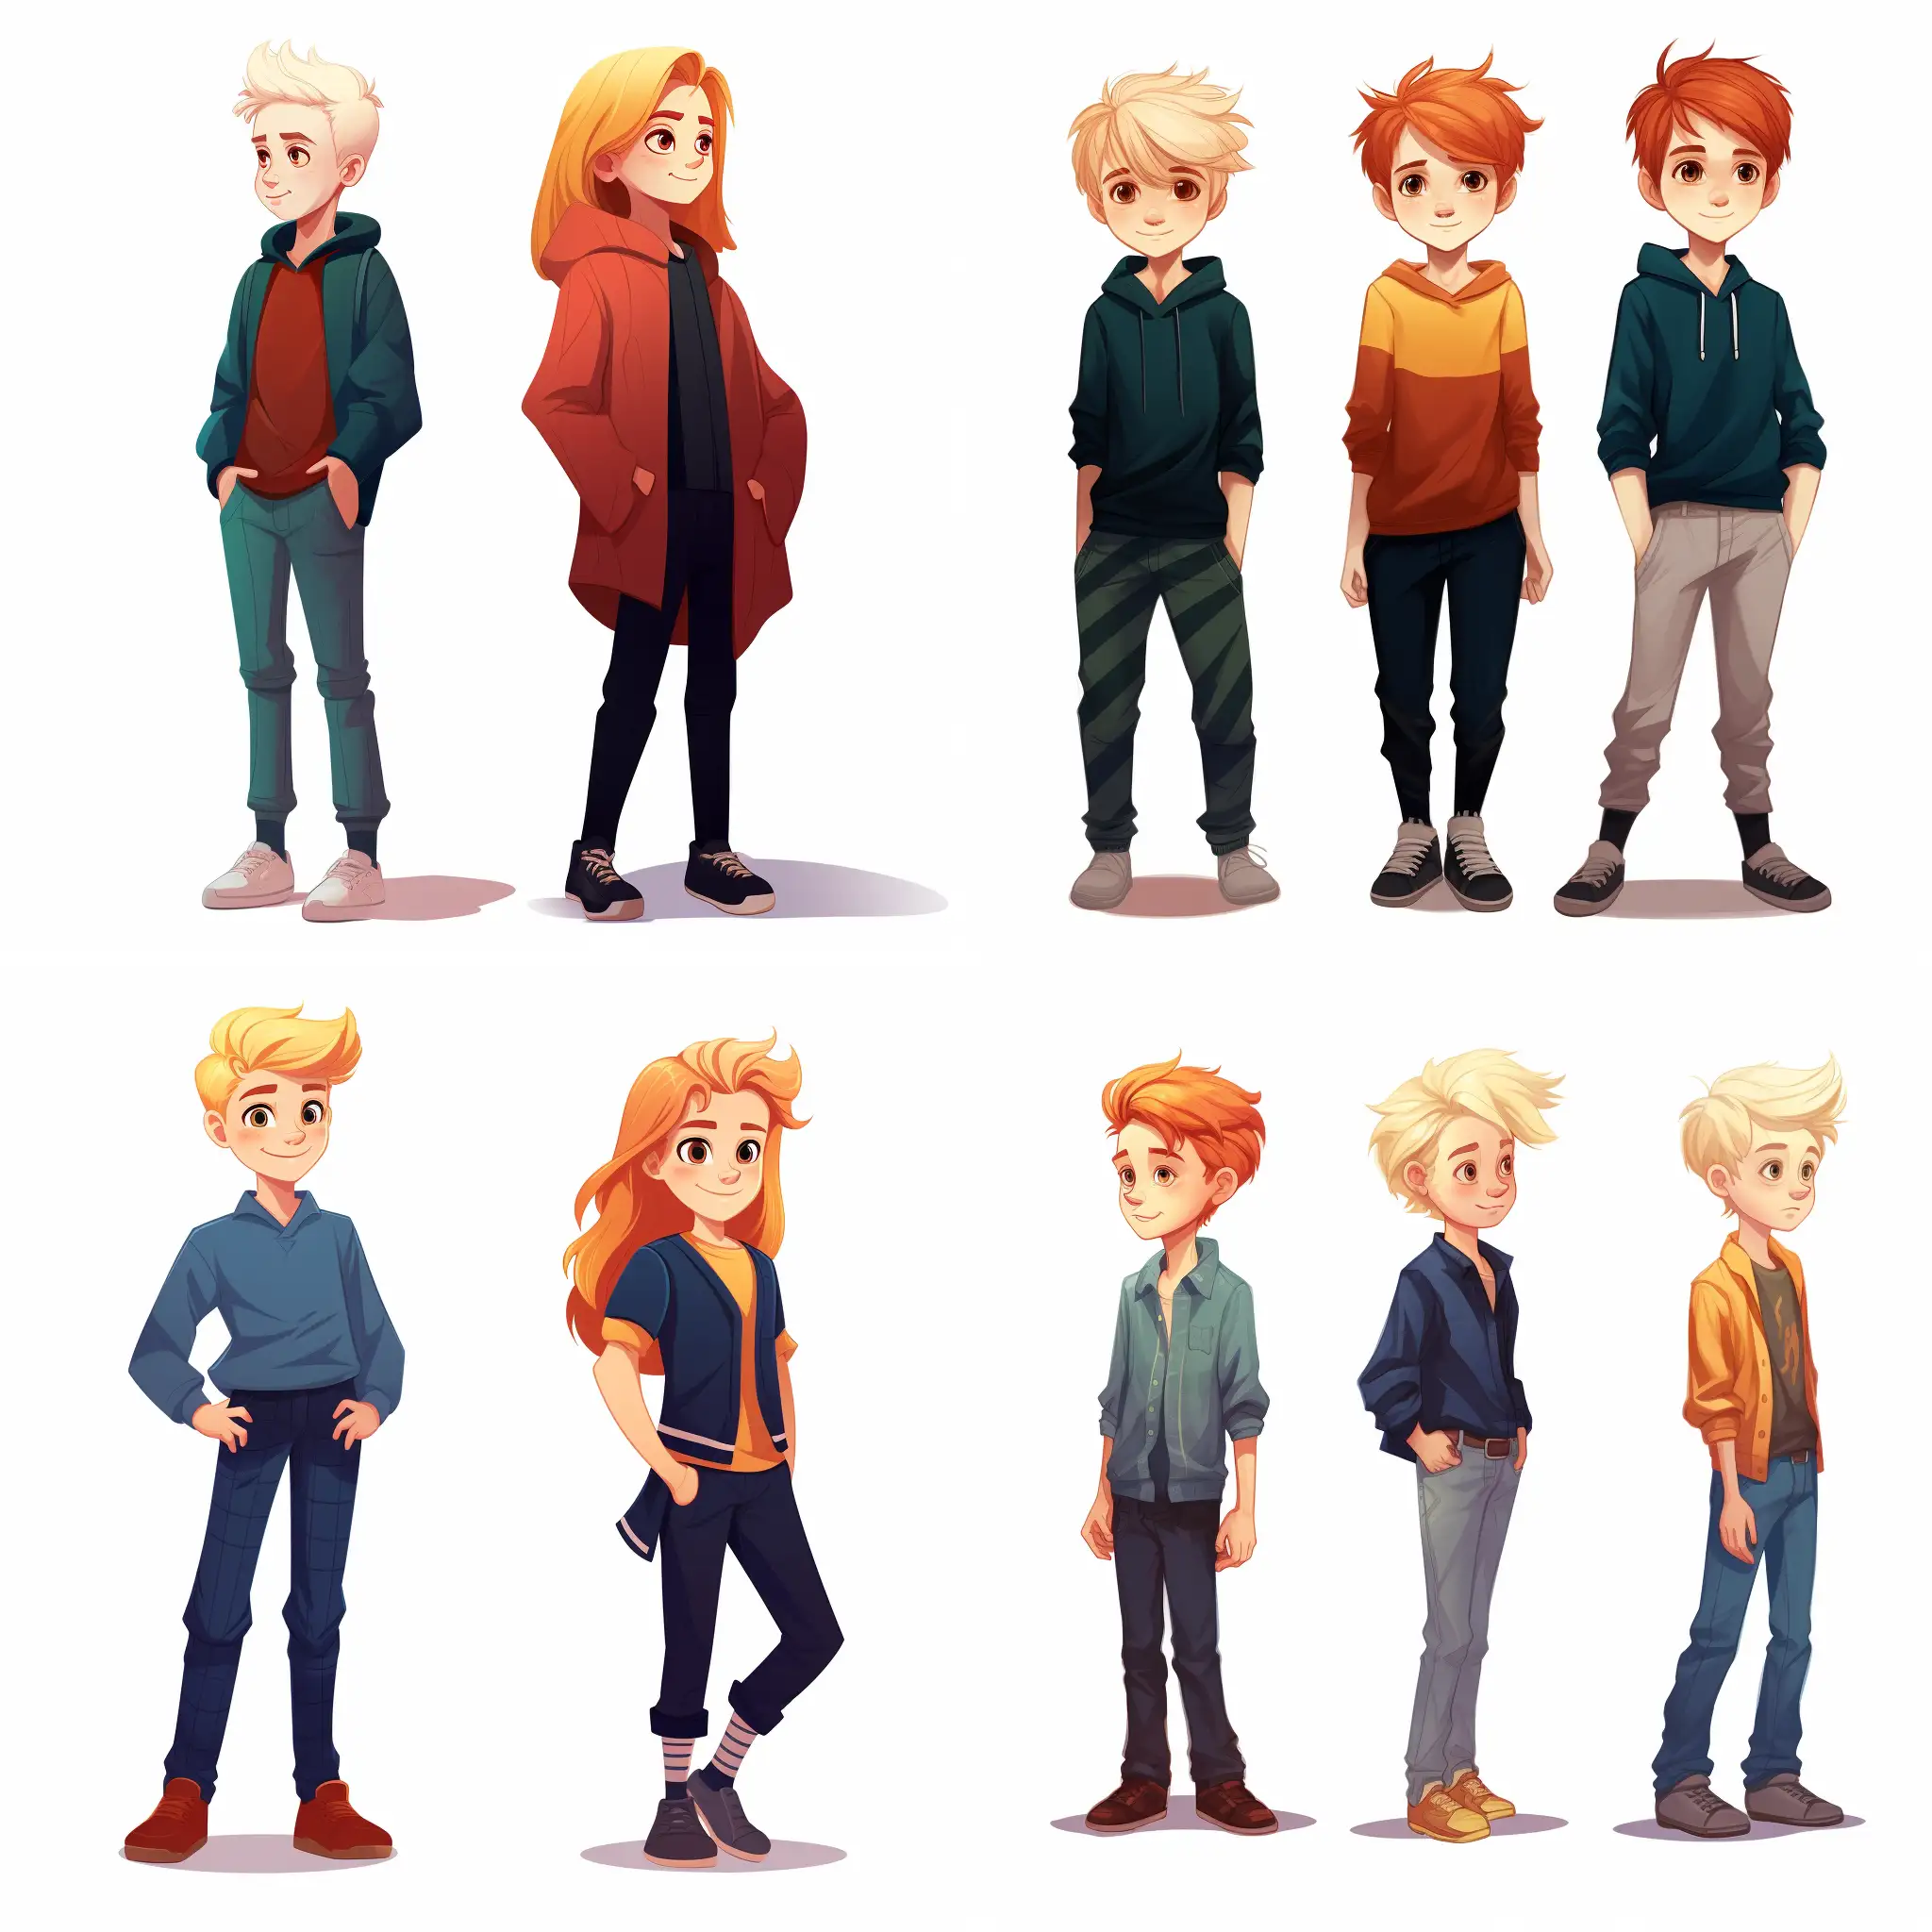 a full-length figure of a boy who looks like Malfoy Draco, a full-length figure of a girl who looks like Hermione Jean Granger, a figure of a boy who looks like Ronald Bilius Weasley, on a white background, bright colors, cartoon style, illustration